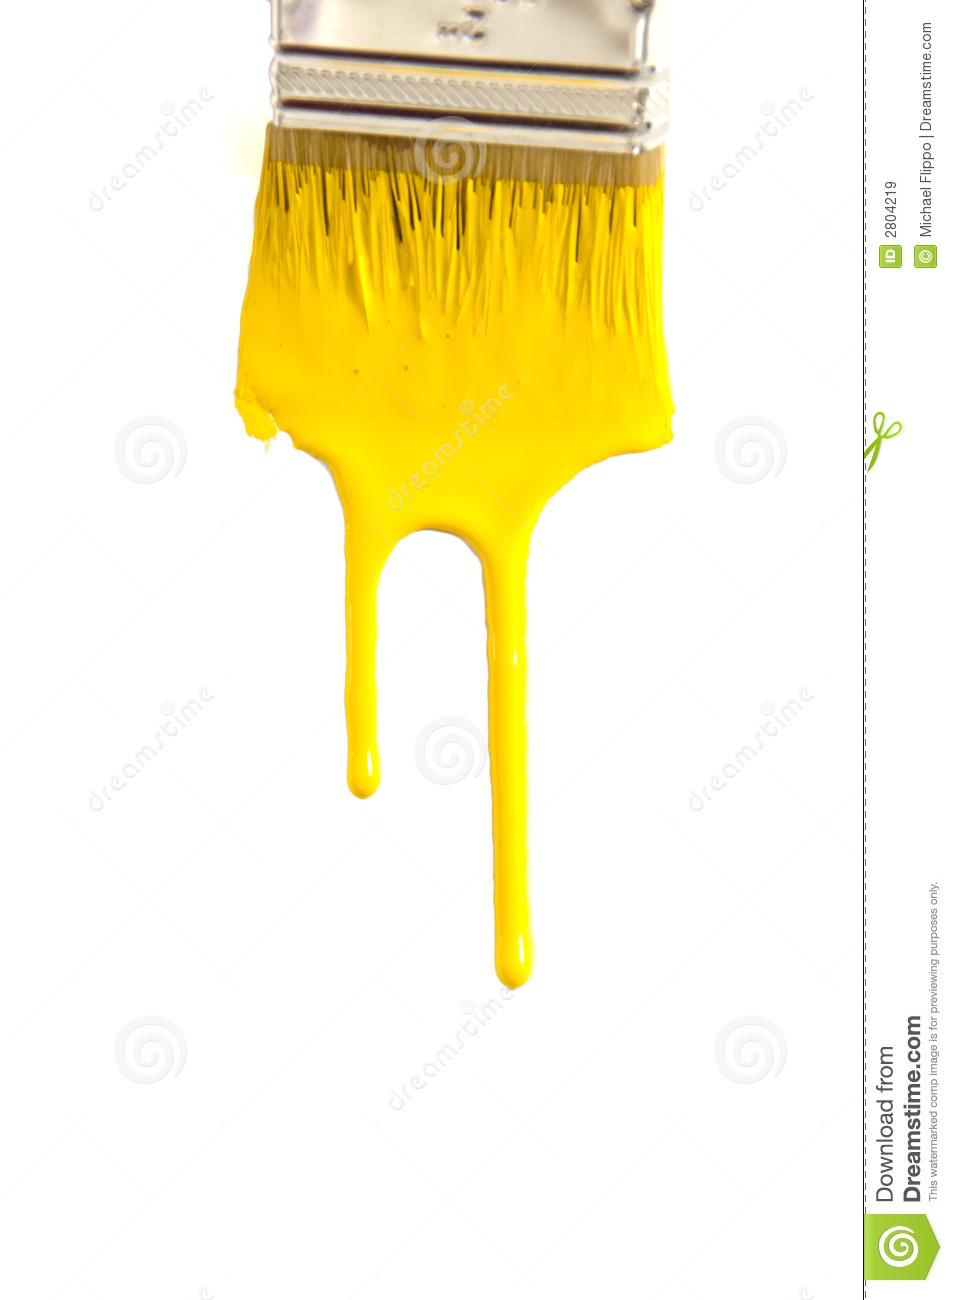 Dripping Paint Brush Clip Art Dripping Paint Royalty Free Stock Images    